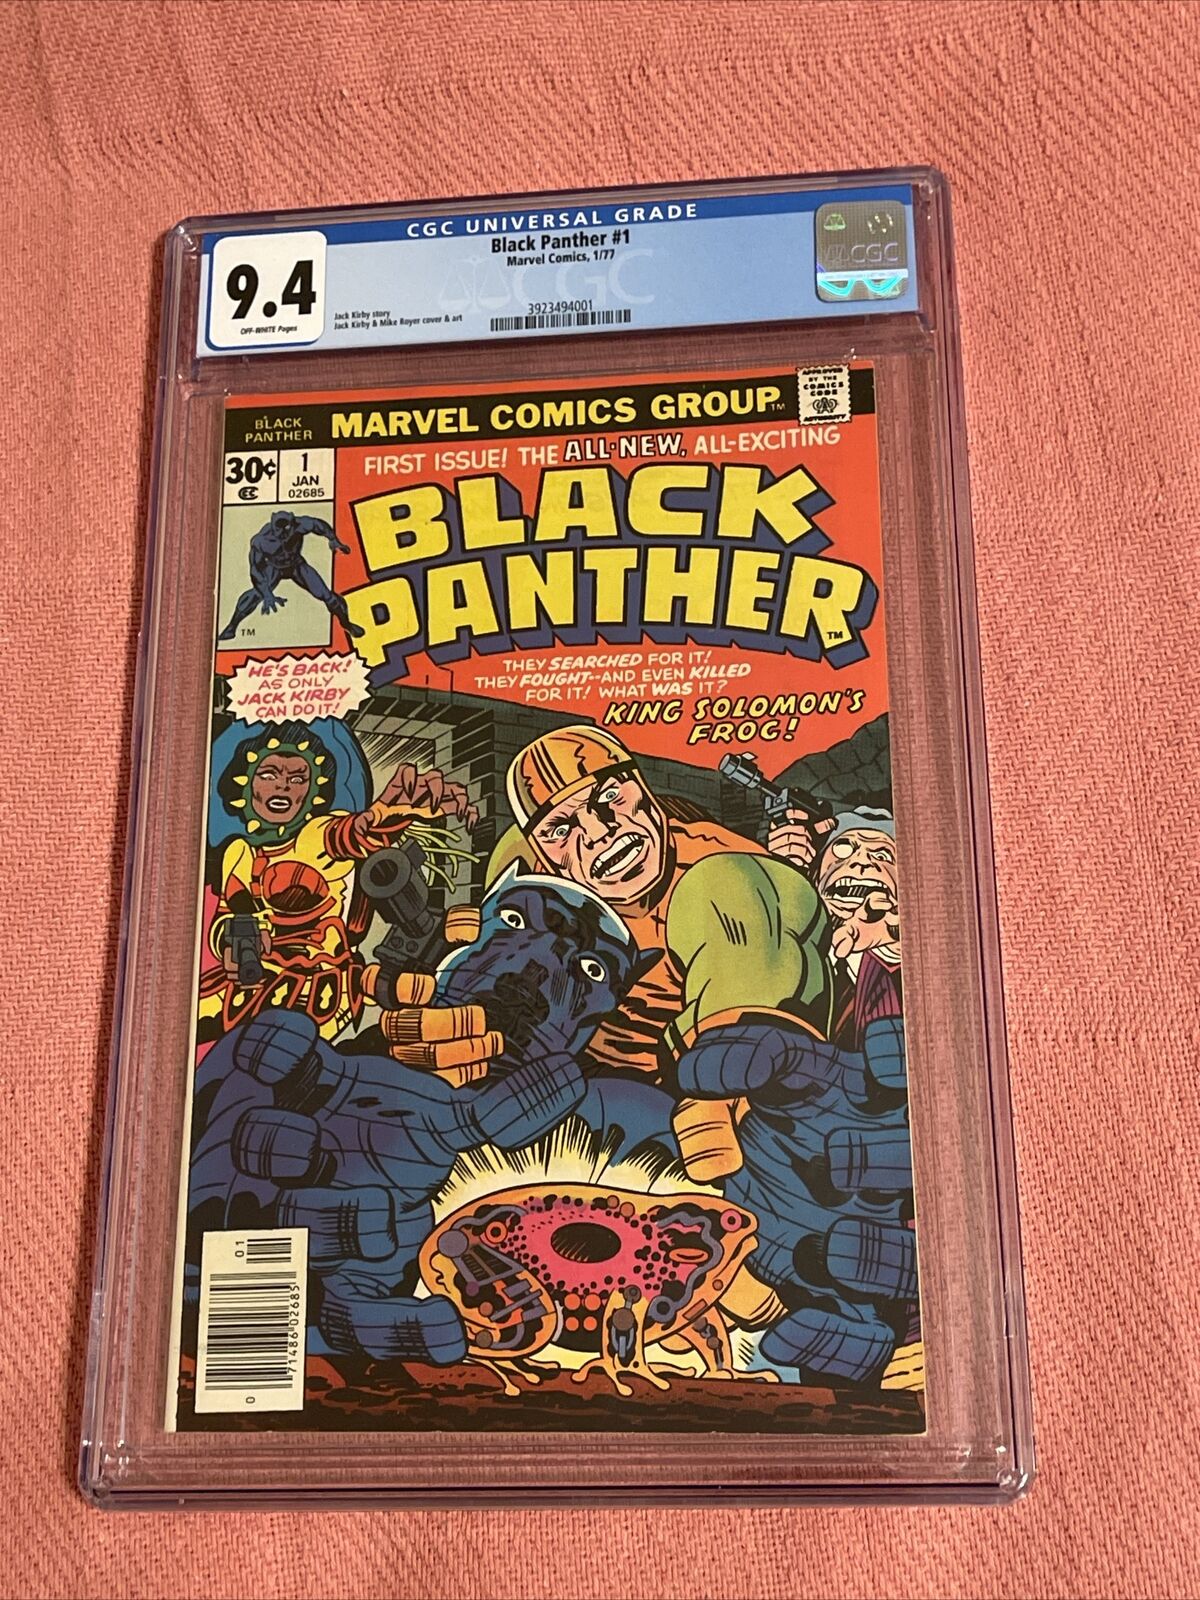 Black Panther #1 CGC 9.4 Off-white pages, Jack Kirby Art and Story, Marvel